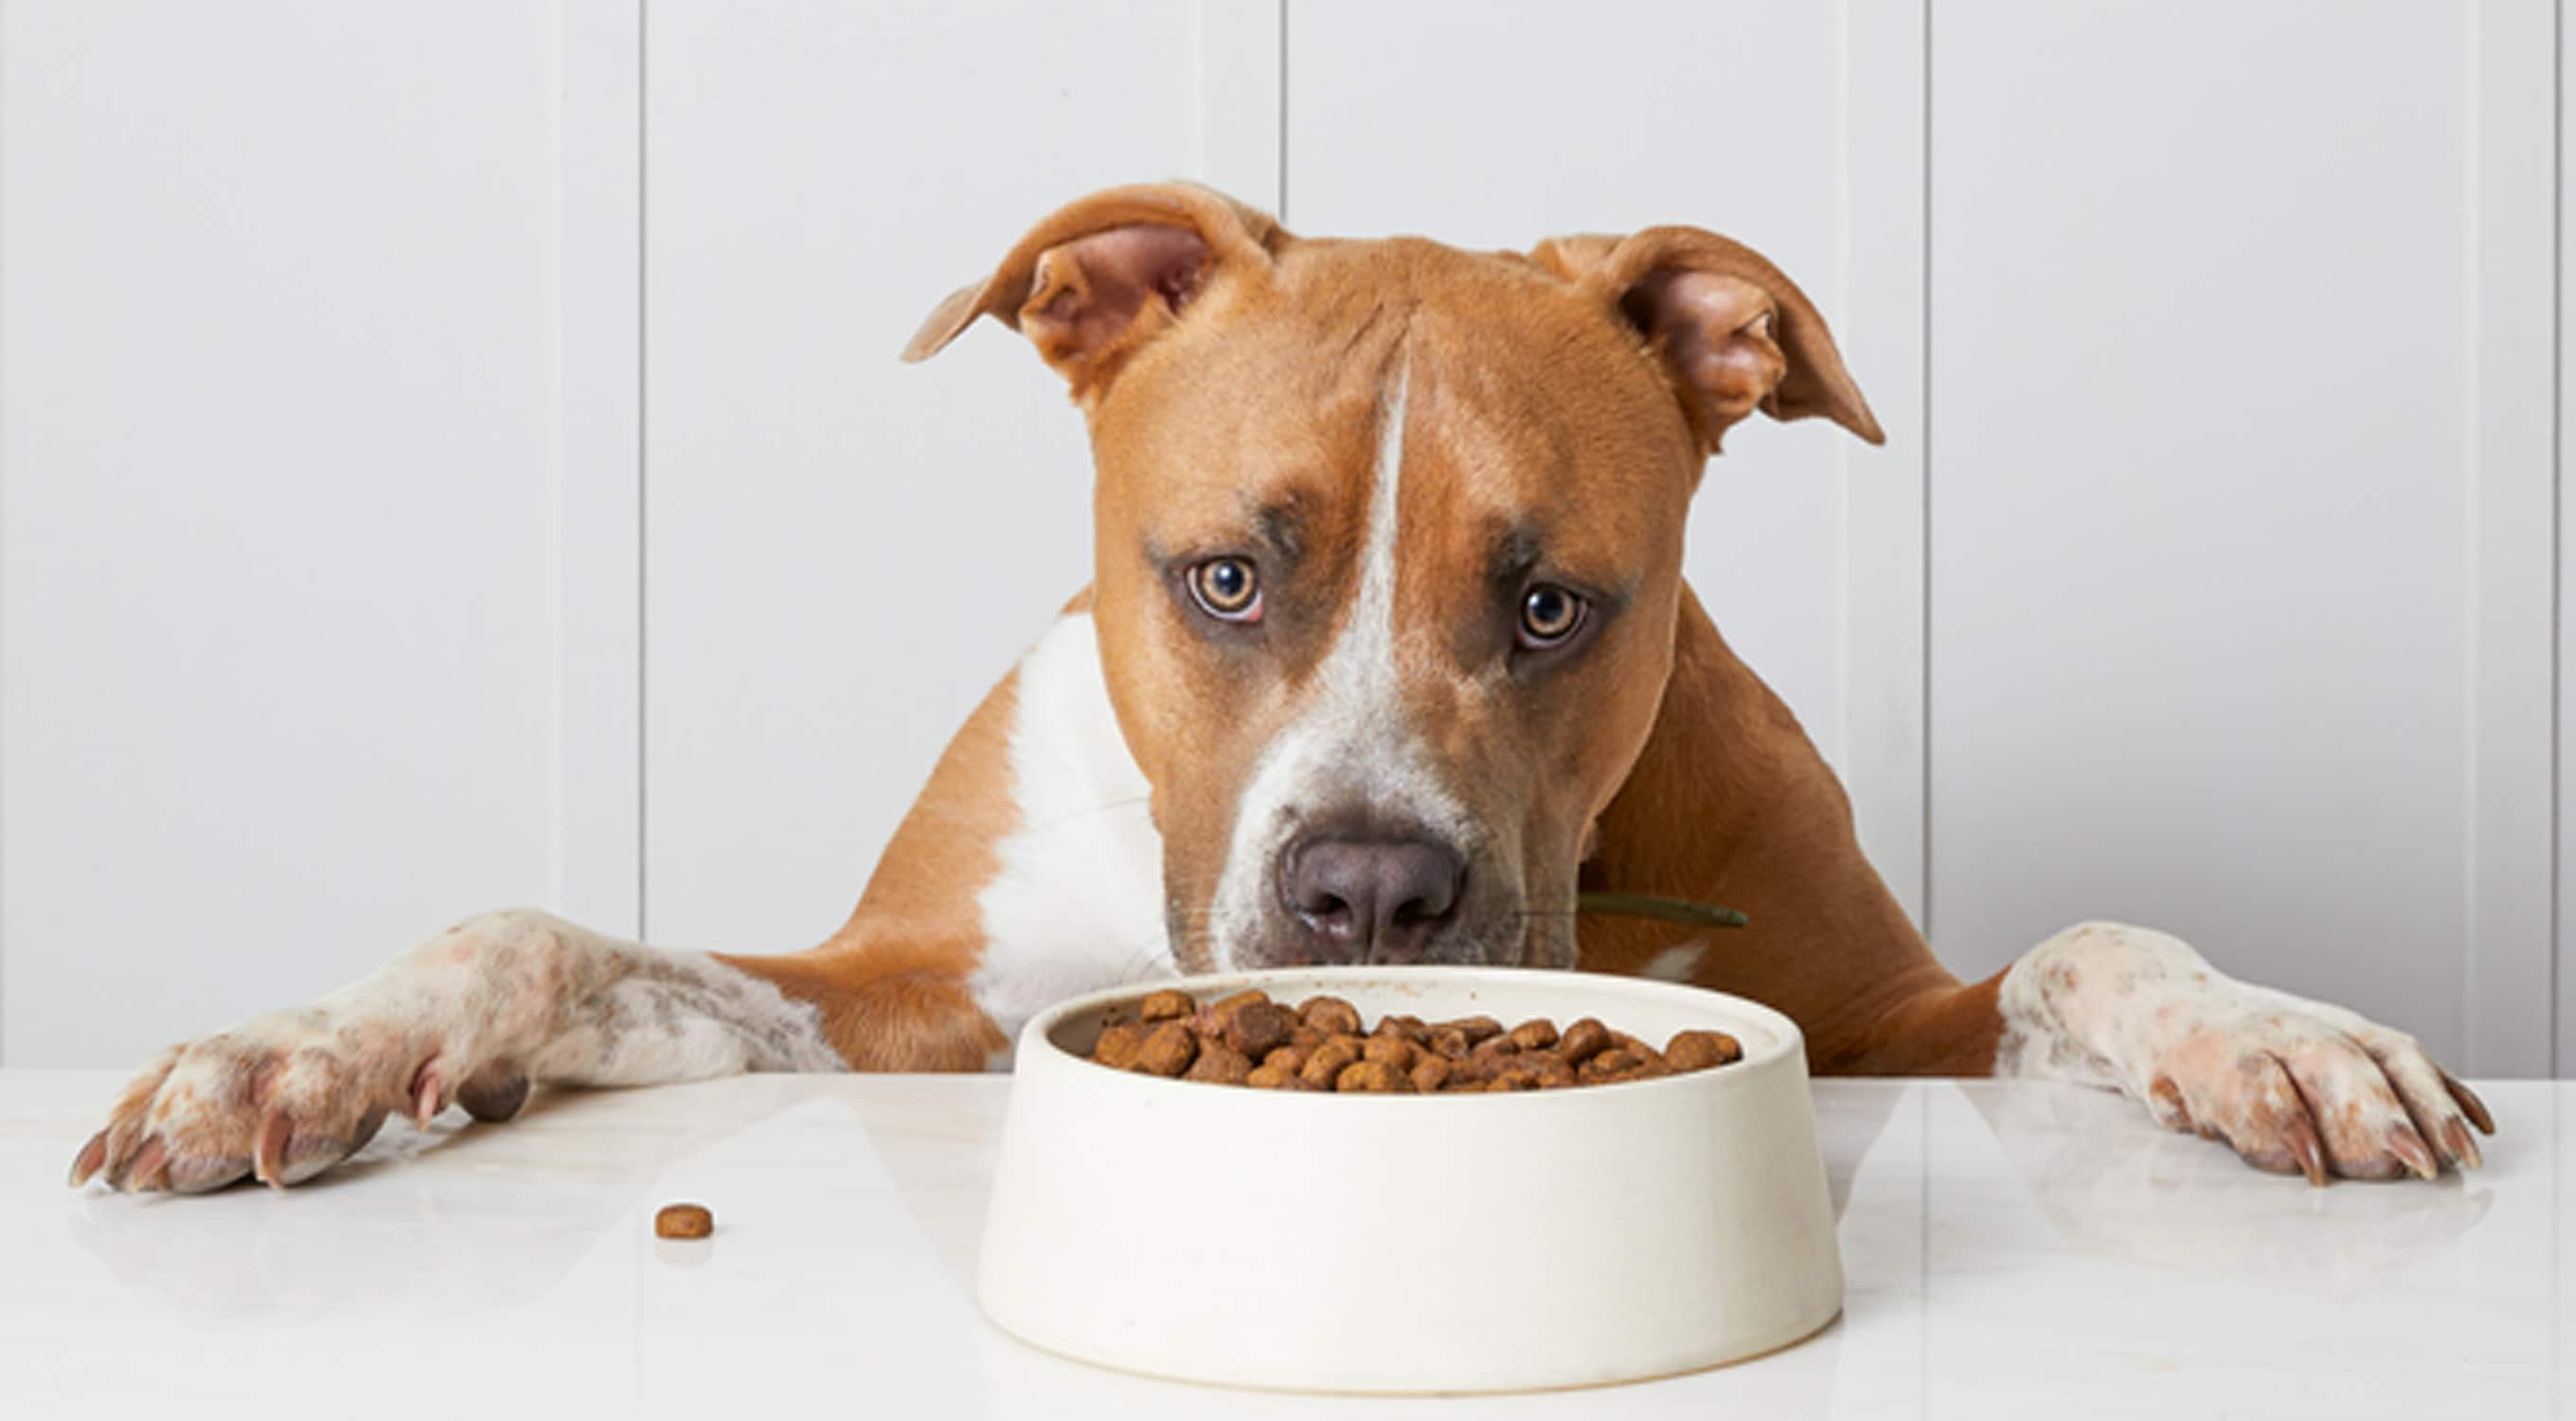 Making Delicious and Nutritious Food for My Dogs - The Martha Stewart Blog